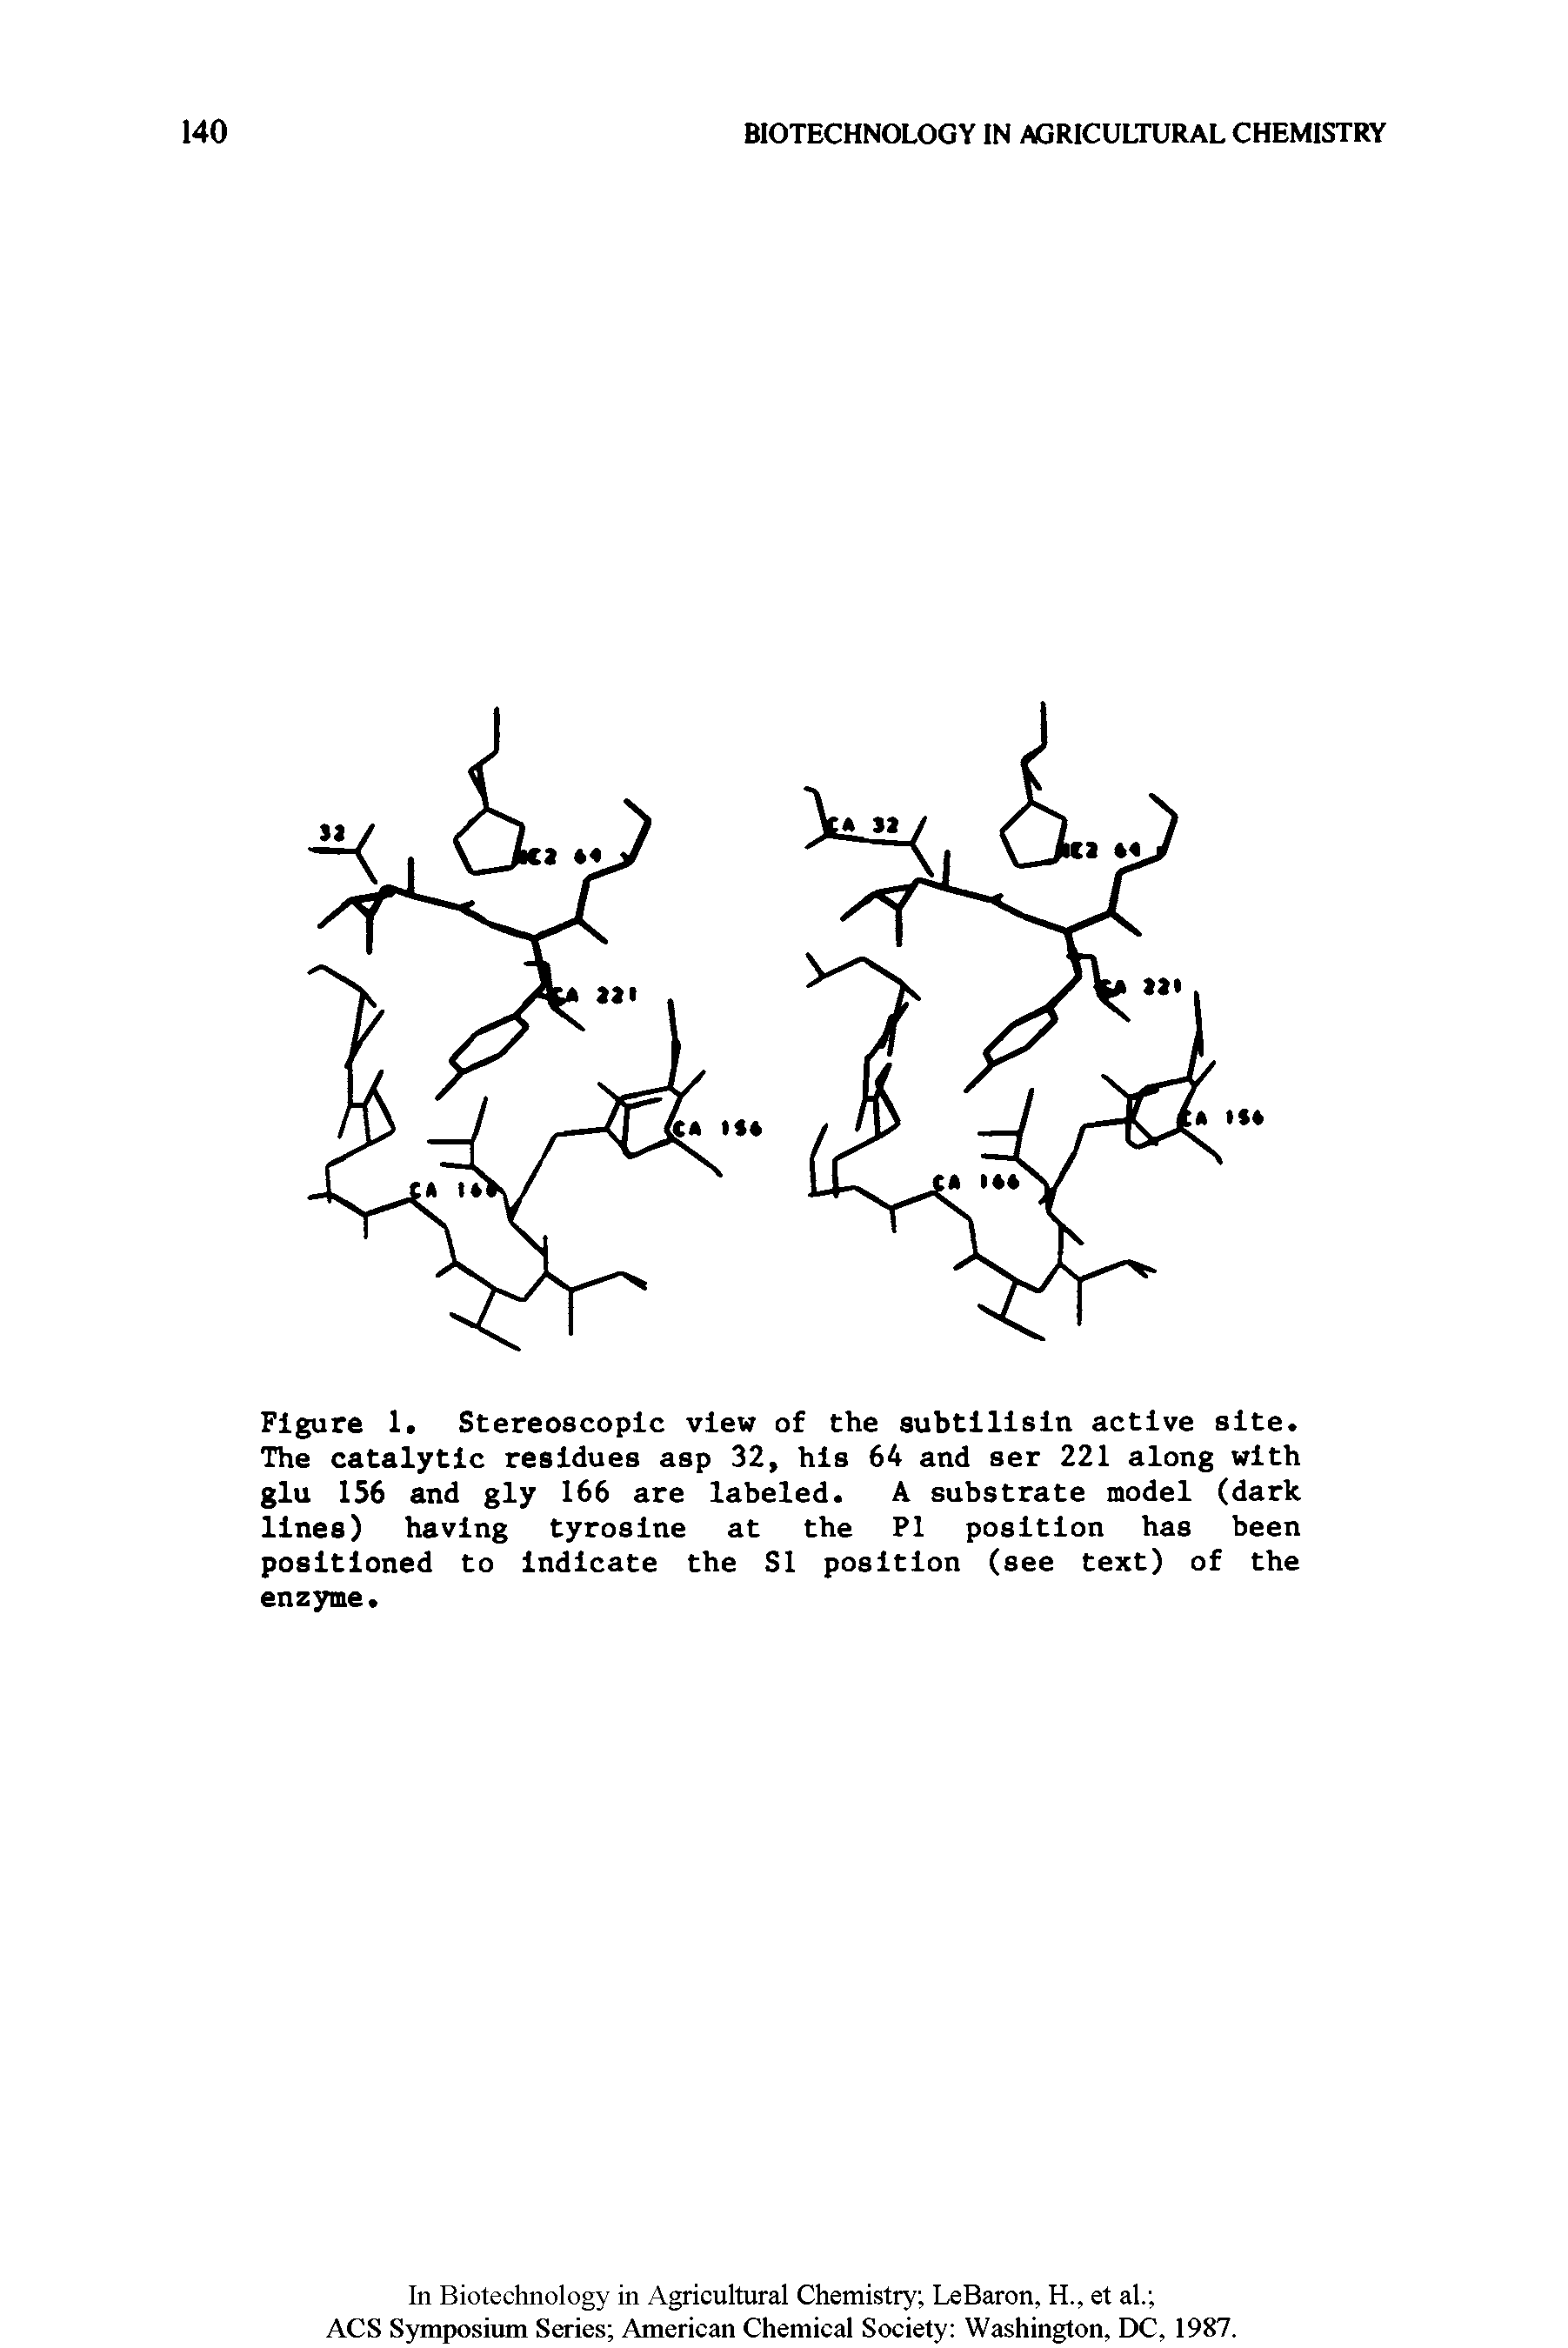 Figure 1. Stereoscopic view of the subtlllsln active site. The catalytic residues asp 32, his 64 and ser 221 along with glu 156 and gly 166 are labeled. A substrate model (dark lines) having tyrosine at the PI position has been positioned to Indicate the SI position (see text) of the enzyme.